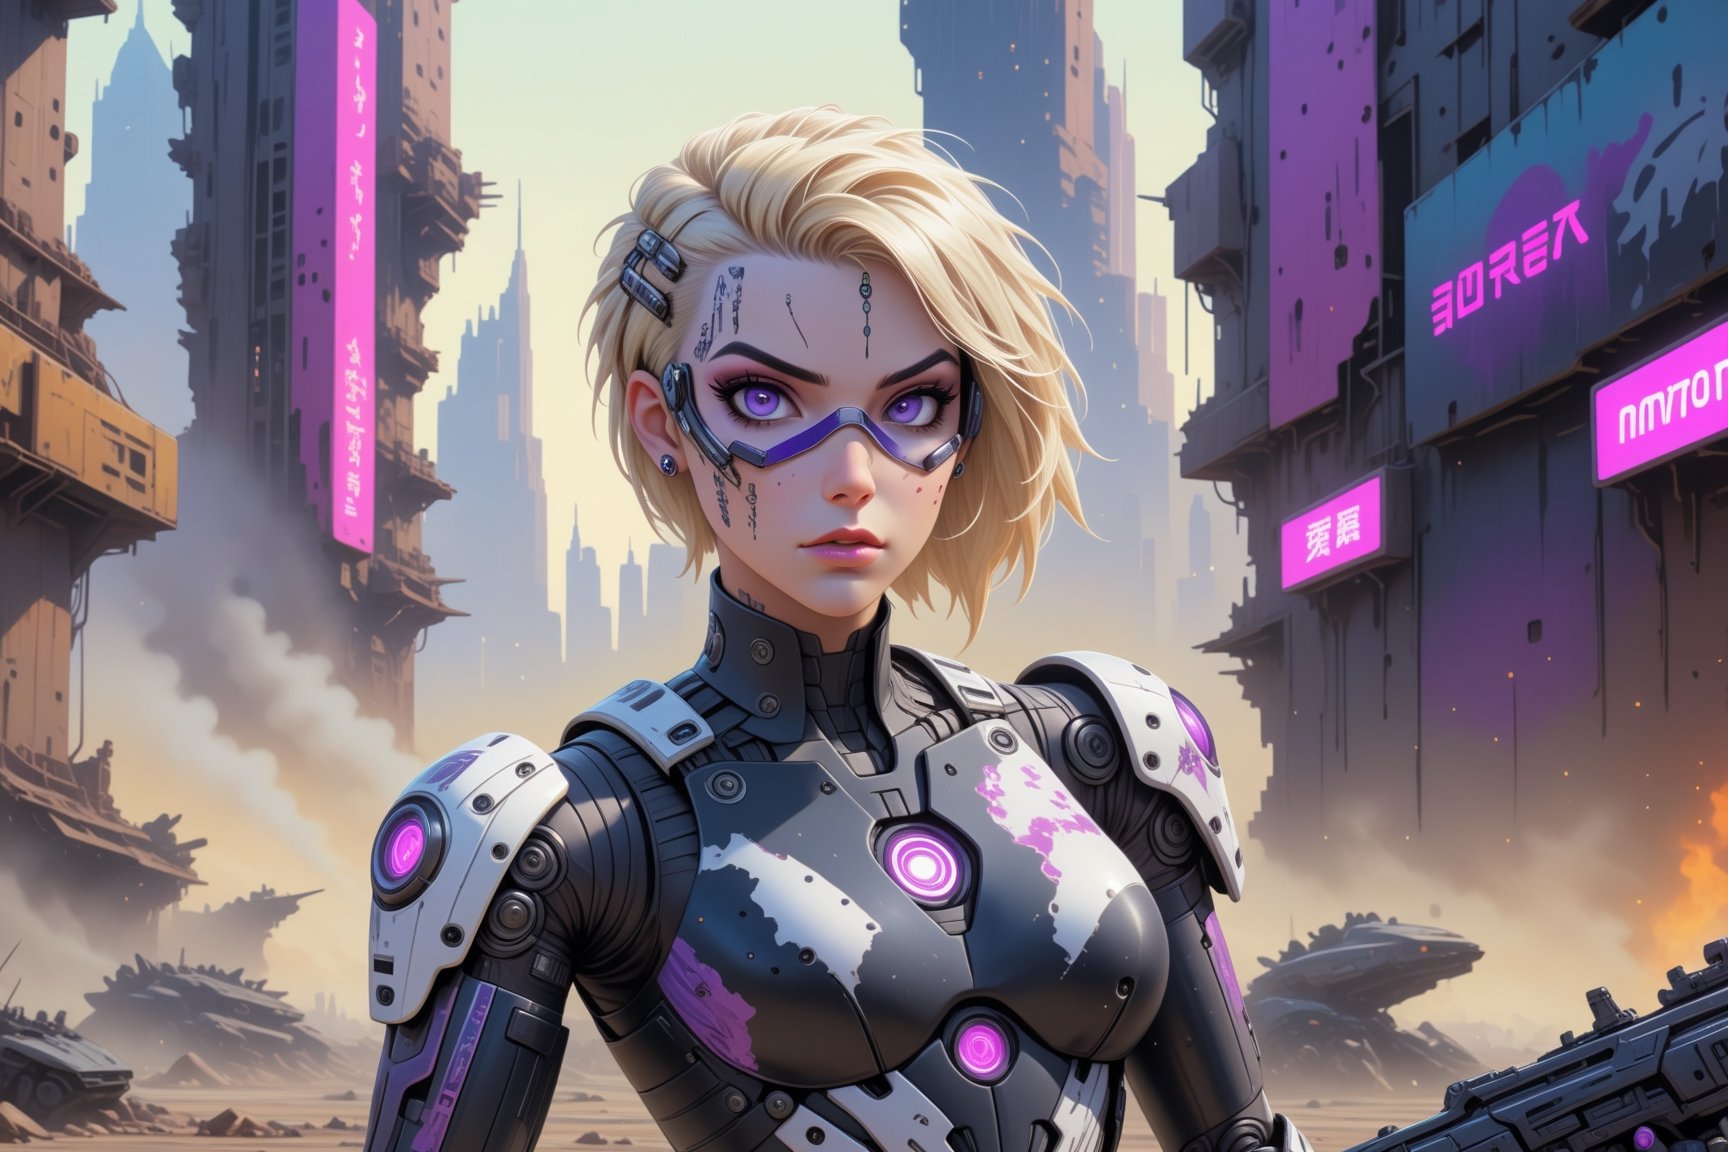 comic book illustration of a portrait of a cyborg woman in a dystopian city, wearing black and white cyborg suit, cyborg arm, wearing futuristic glasses, (((only one woman))), cyborg parts in face, short blonde with violet highlights hair, tattooed  body, full color, vibrant colors, armed with a gun in her hand, 
sexy body, detailed gorgeous face, lonely environment, jellyfish with jewels in foreground, dystopian city with droids in background, exquisite detail,  30-megapixel, 4k, Flat vector art, Vector illustration, Illustration,cyborg style,cyborg,<lora:659095807385103906:1.0>